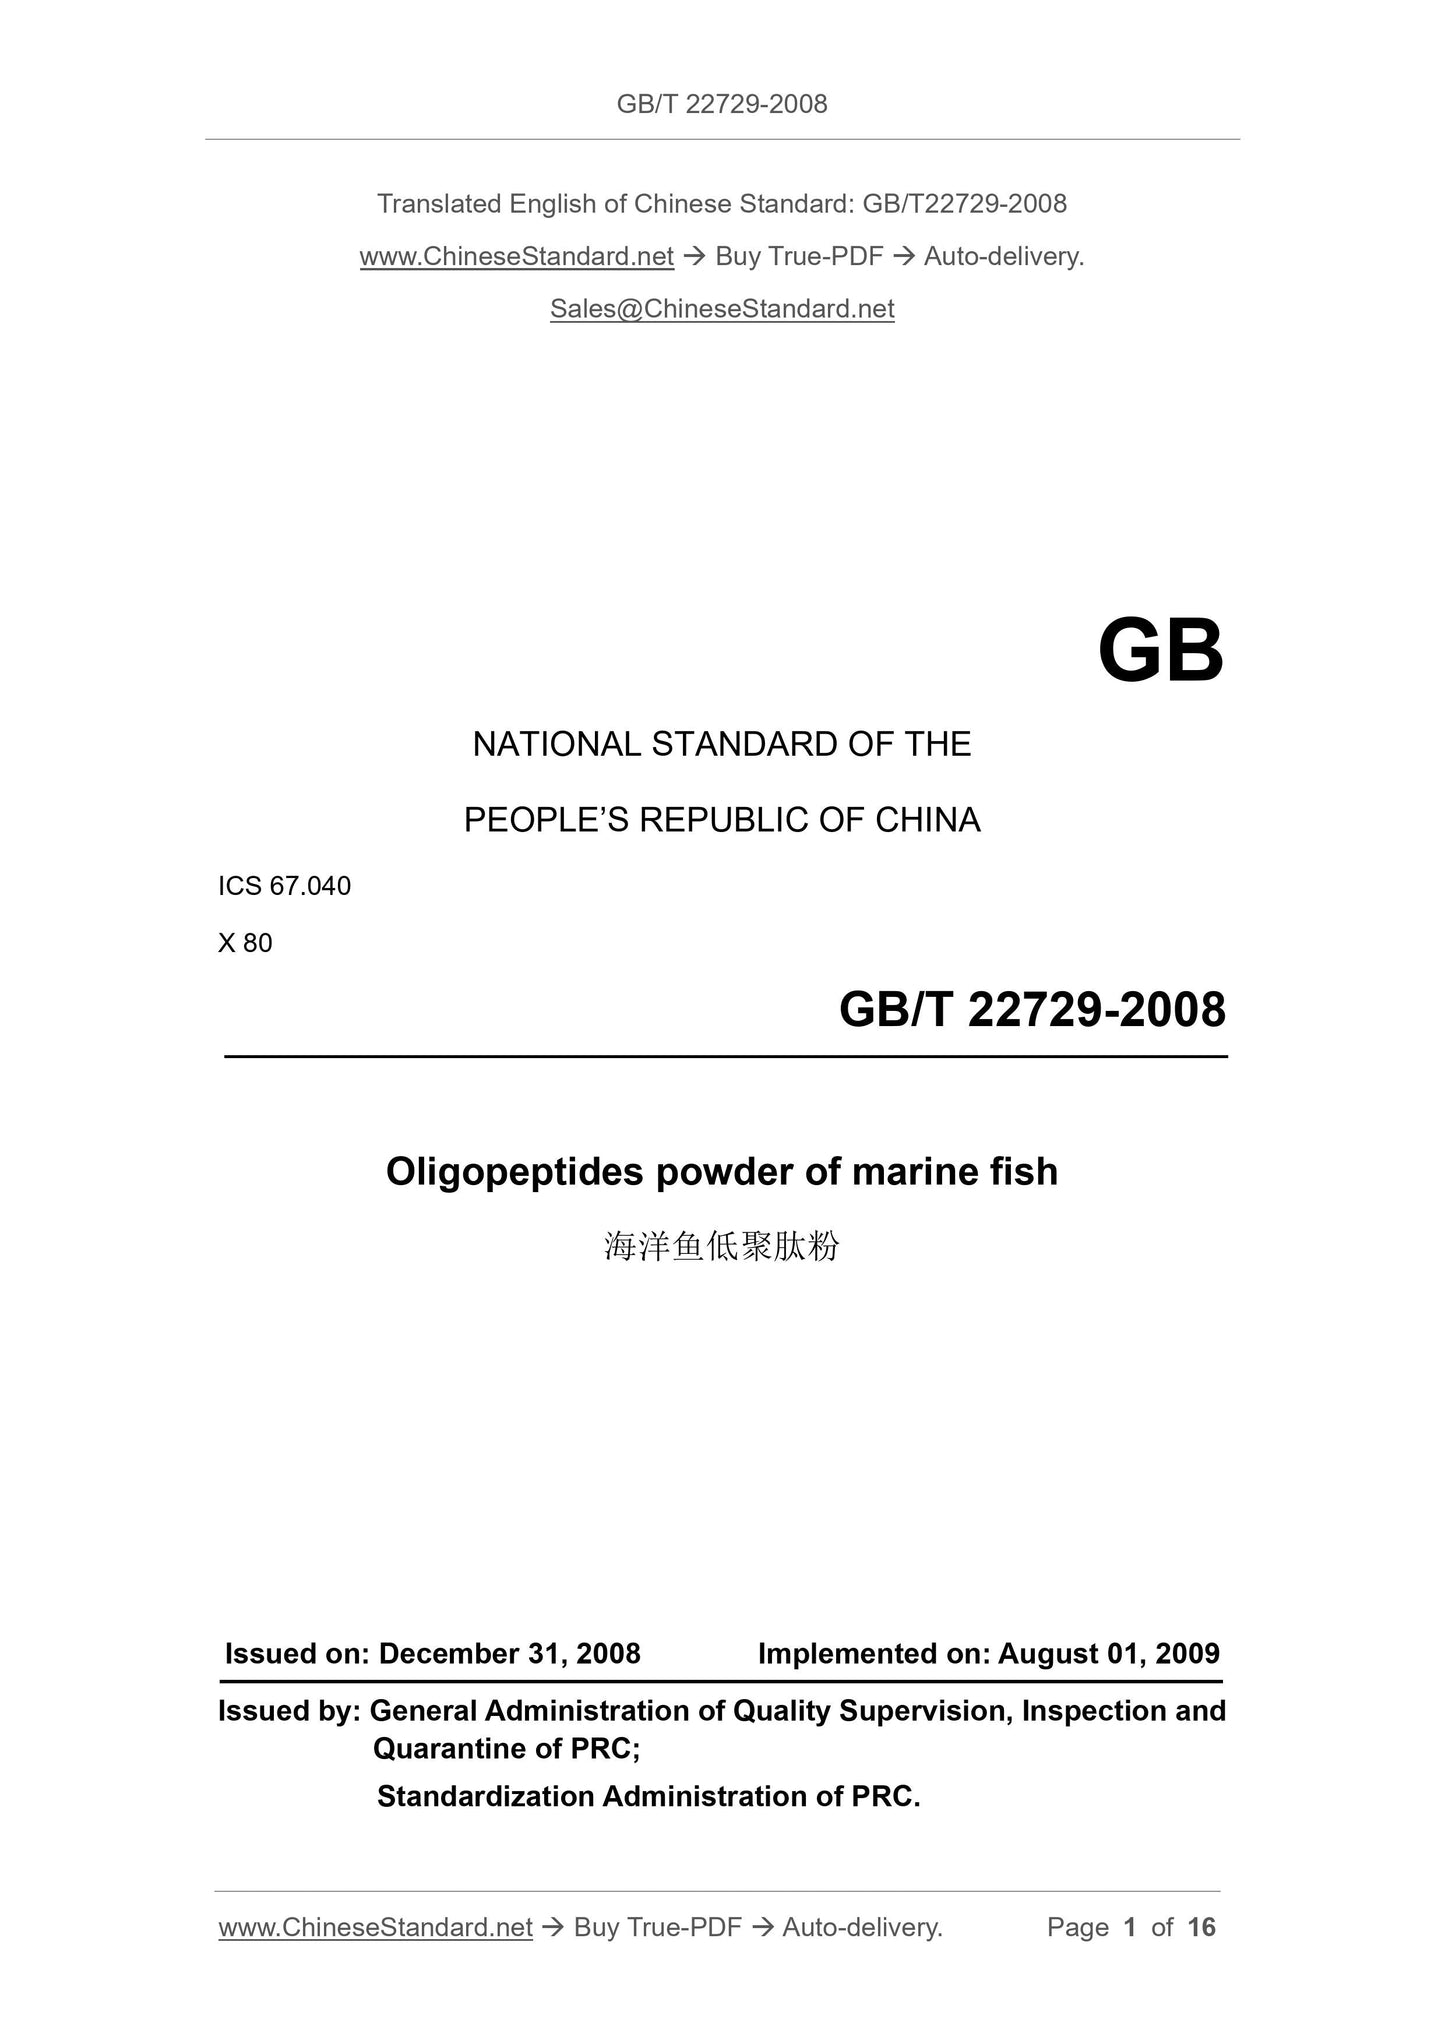 GB/T 22729-2008 Page 1